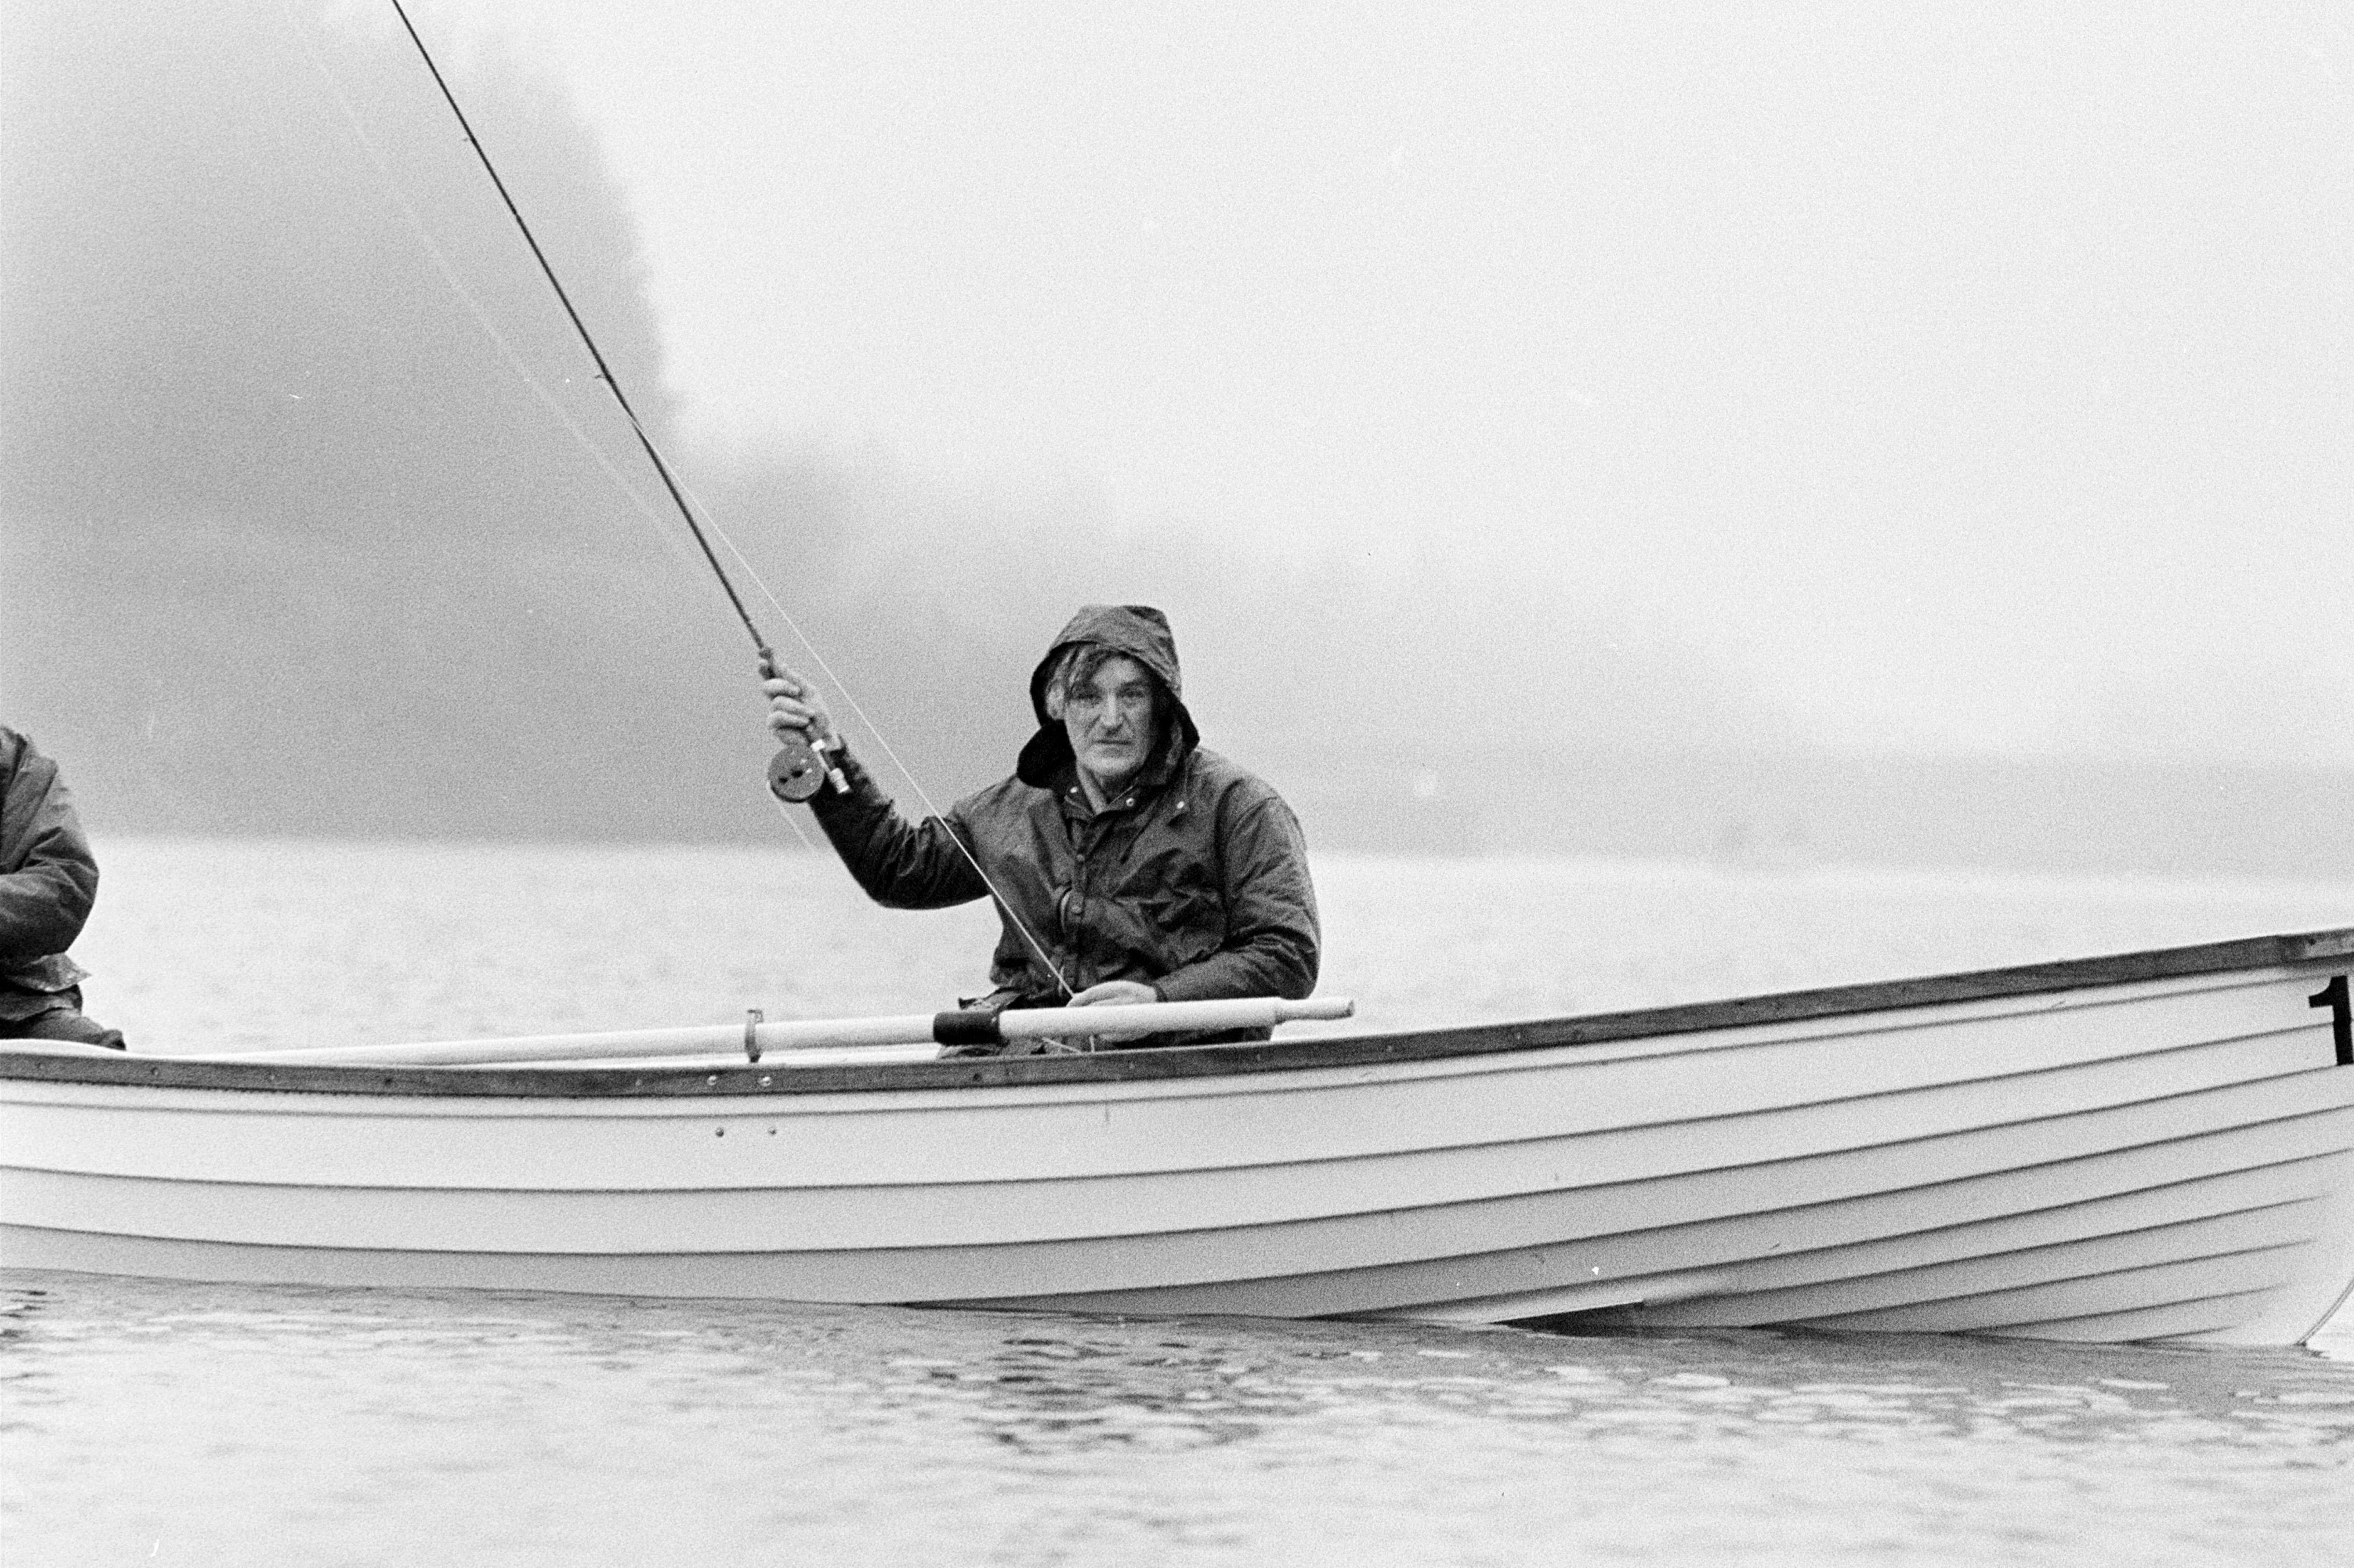 Ted Hughes on the first day of the trout fishing season at Wistlandpound, Devon, 1 April 1986